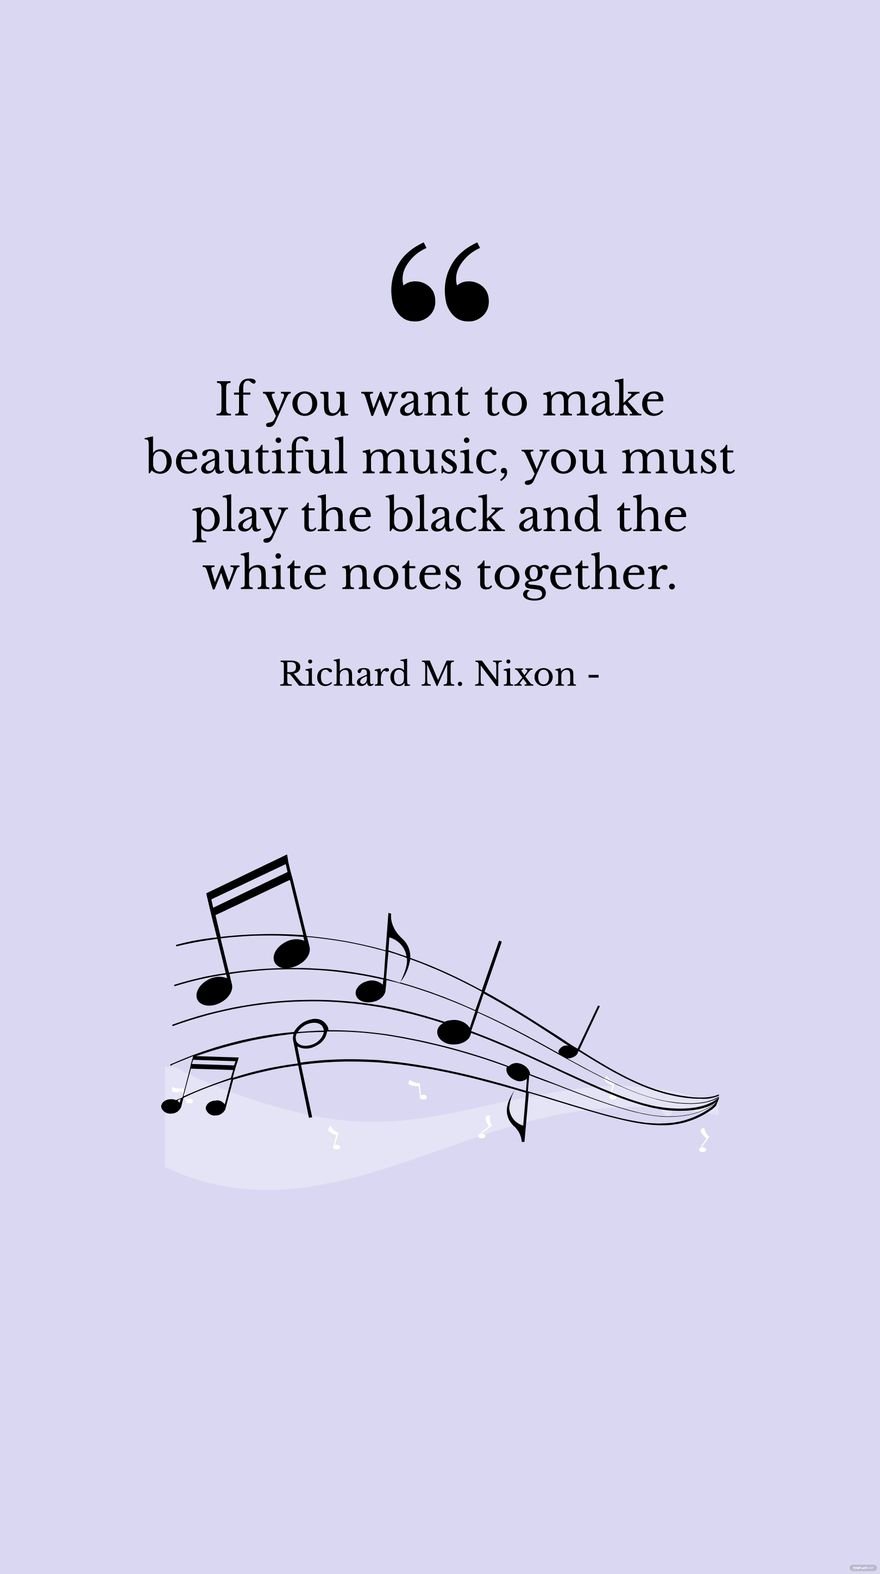 Free Richard M. Nixon - If you want to make beautiful music, you must play the black and the white notes together. in JPG